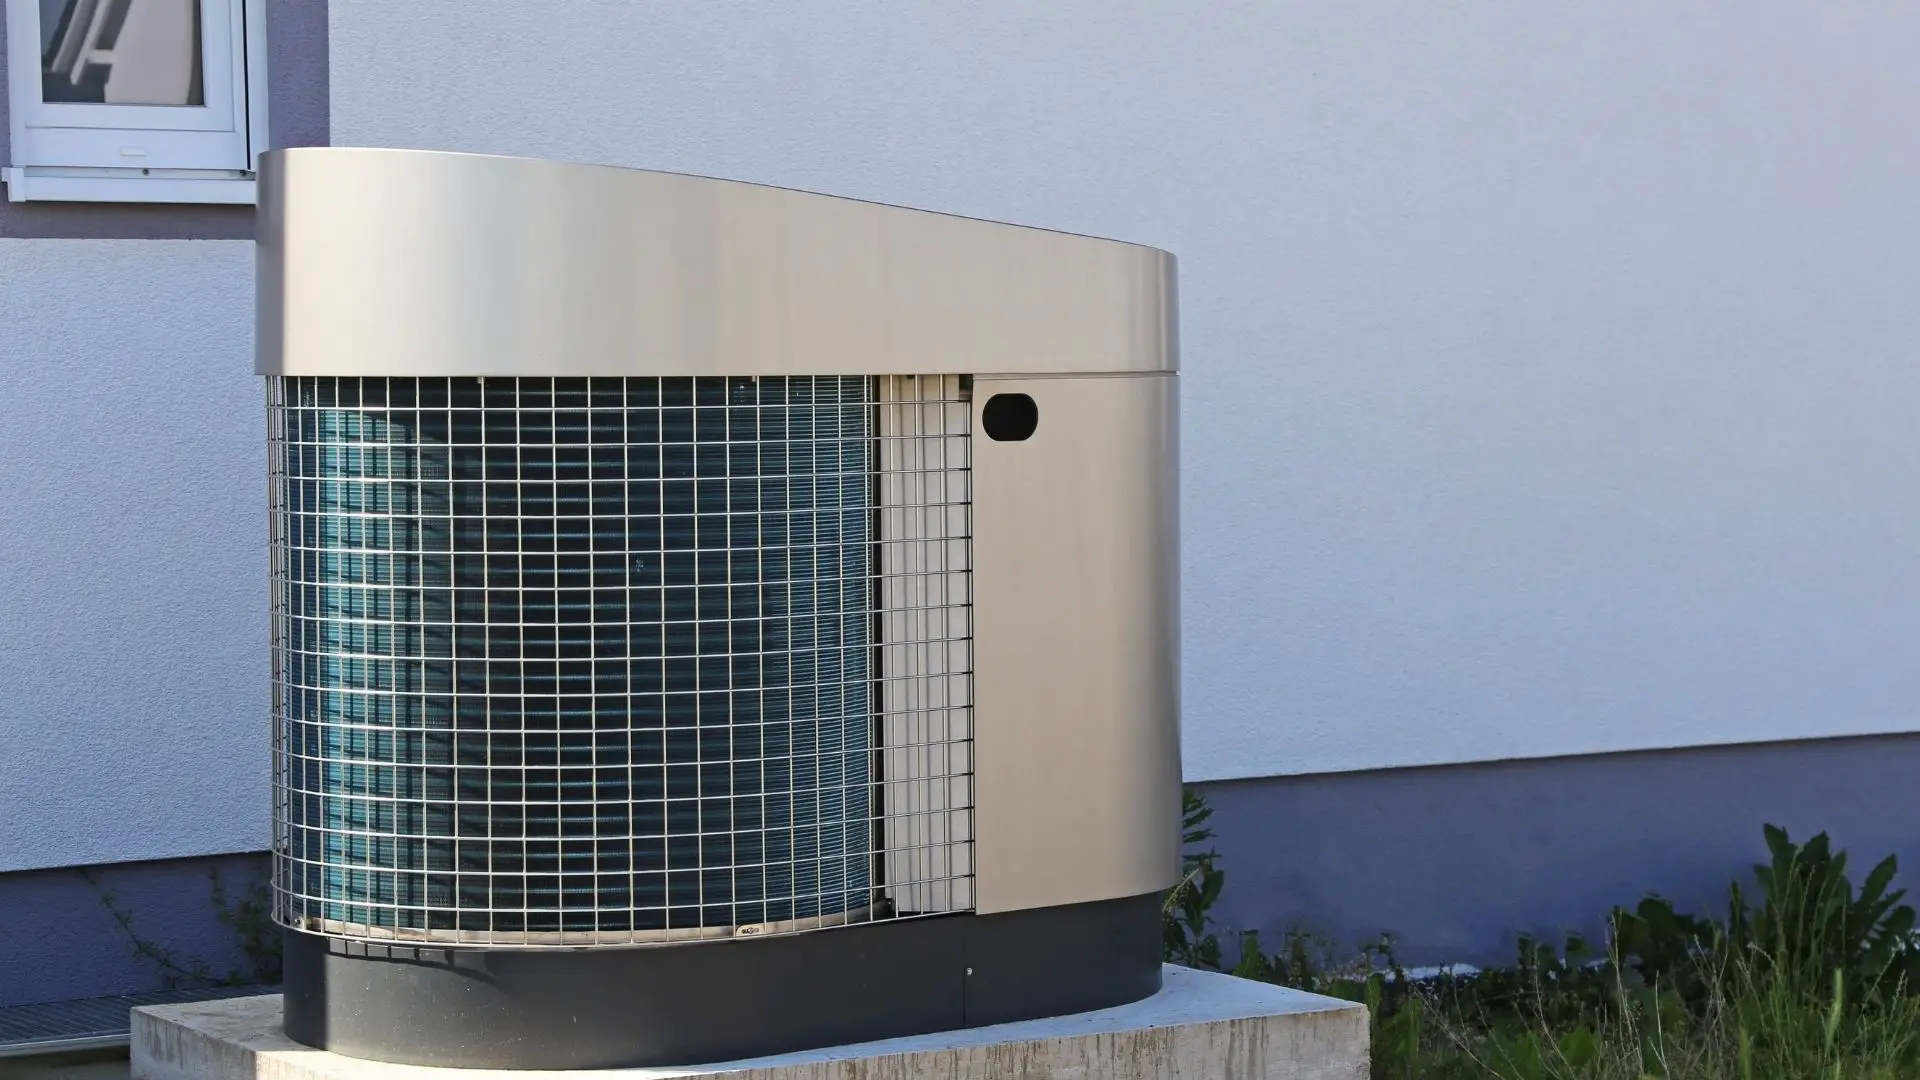 There are various types of heat pumps